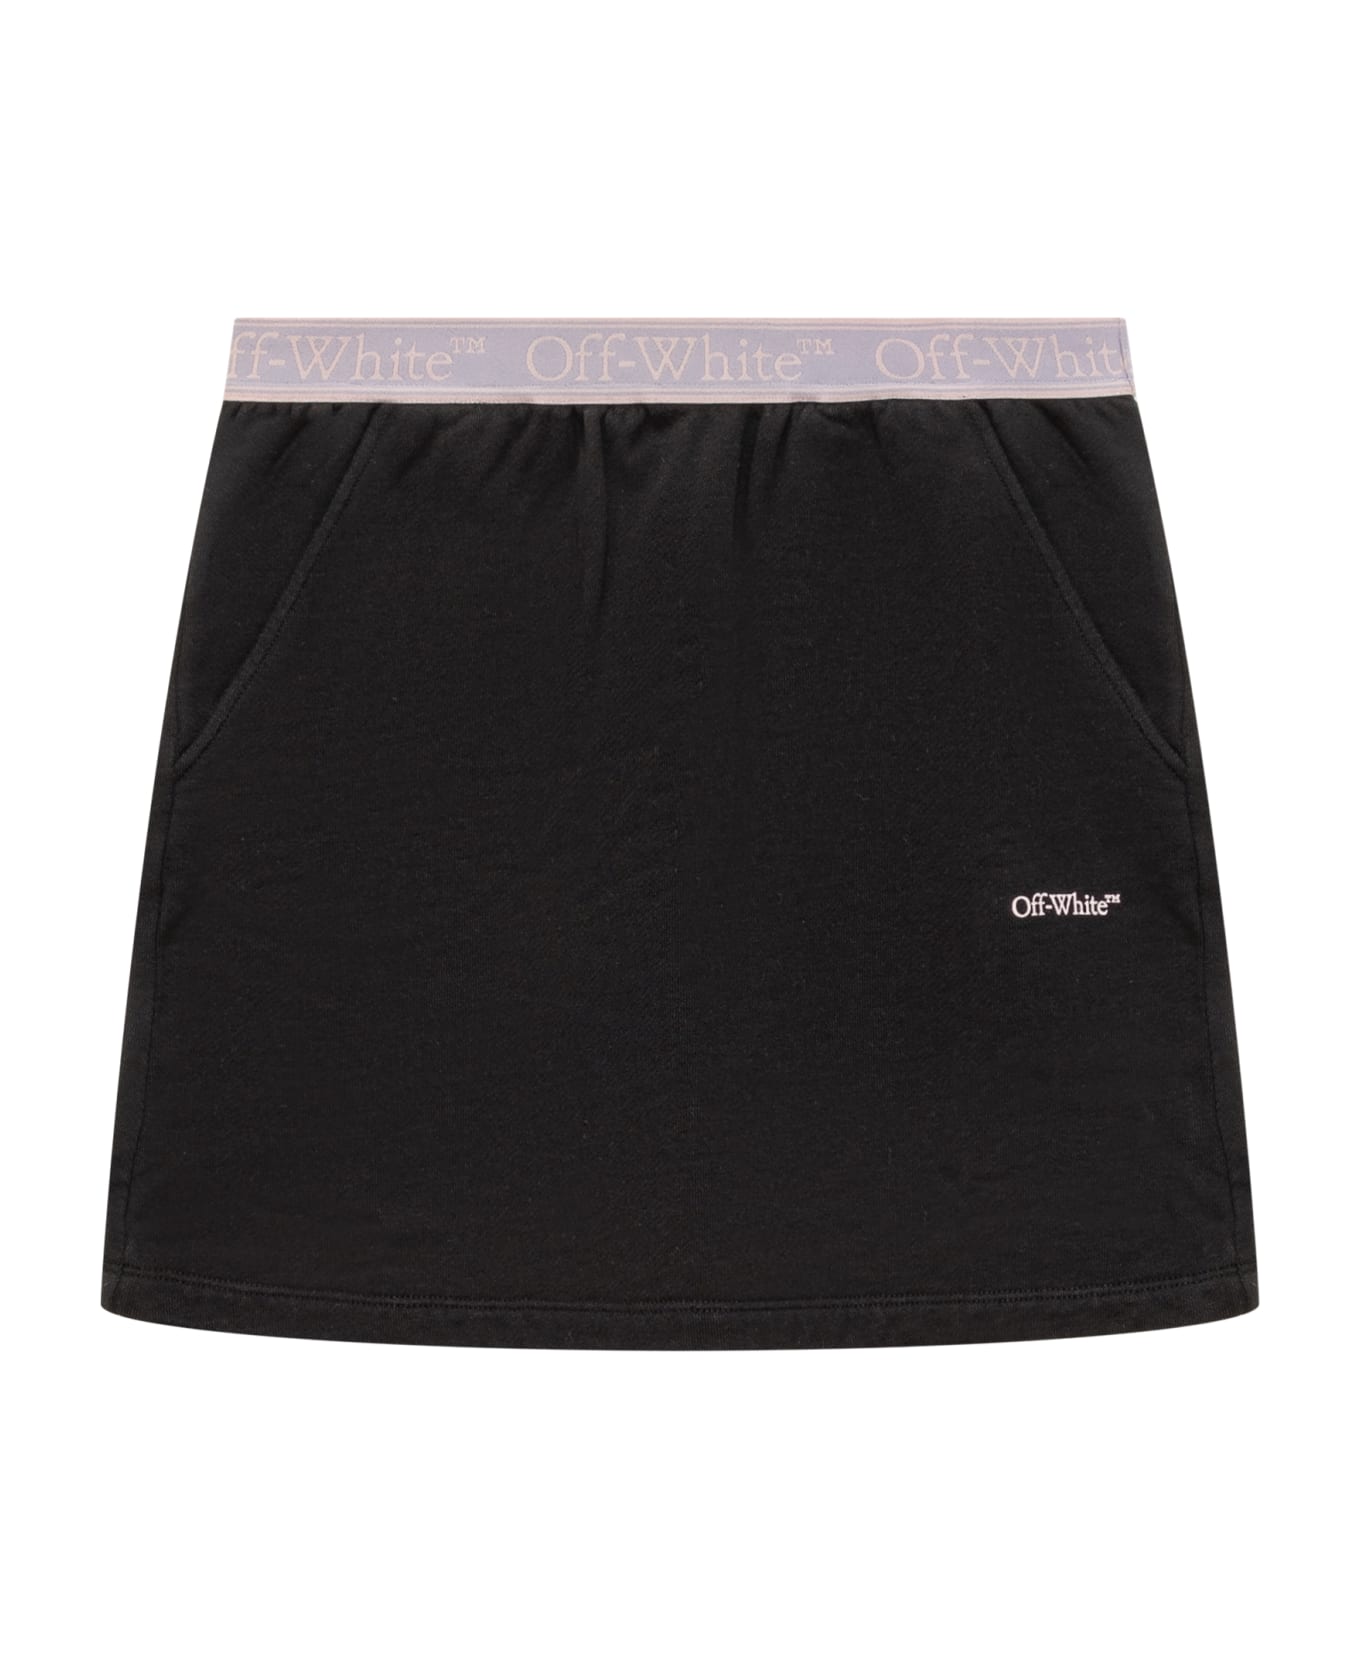 Off-White Bookish Skirt - BLACK LILAC ボトムス